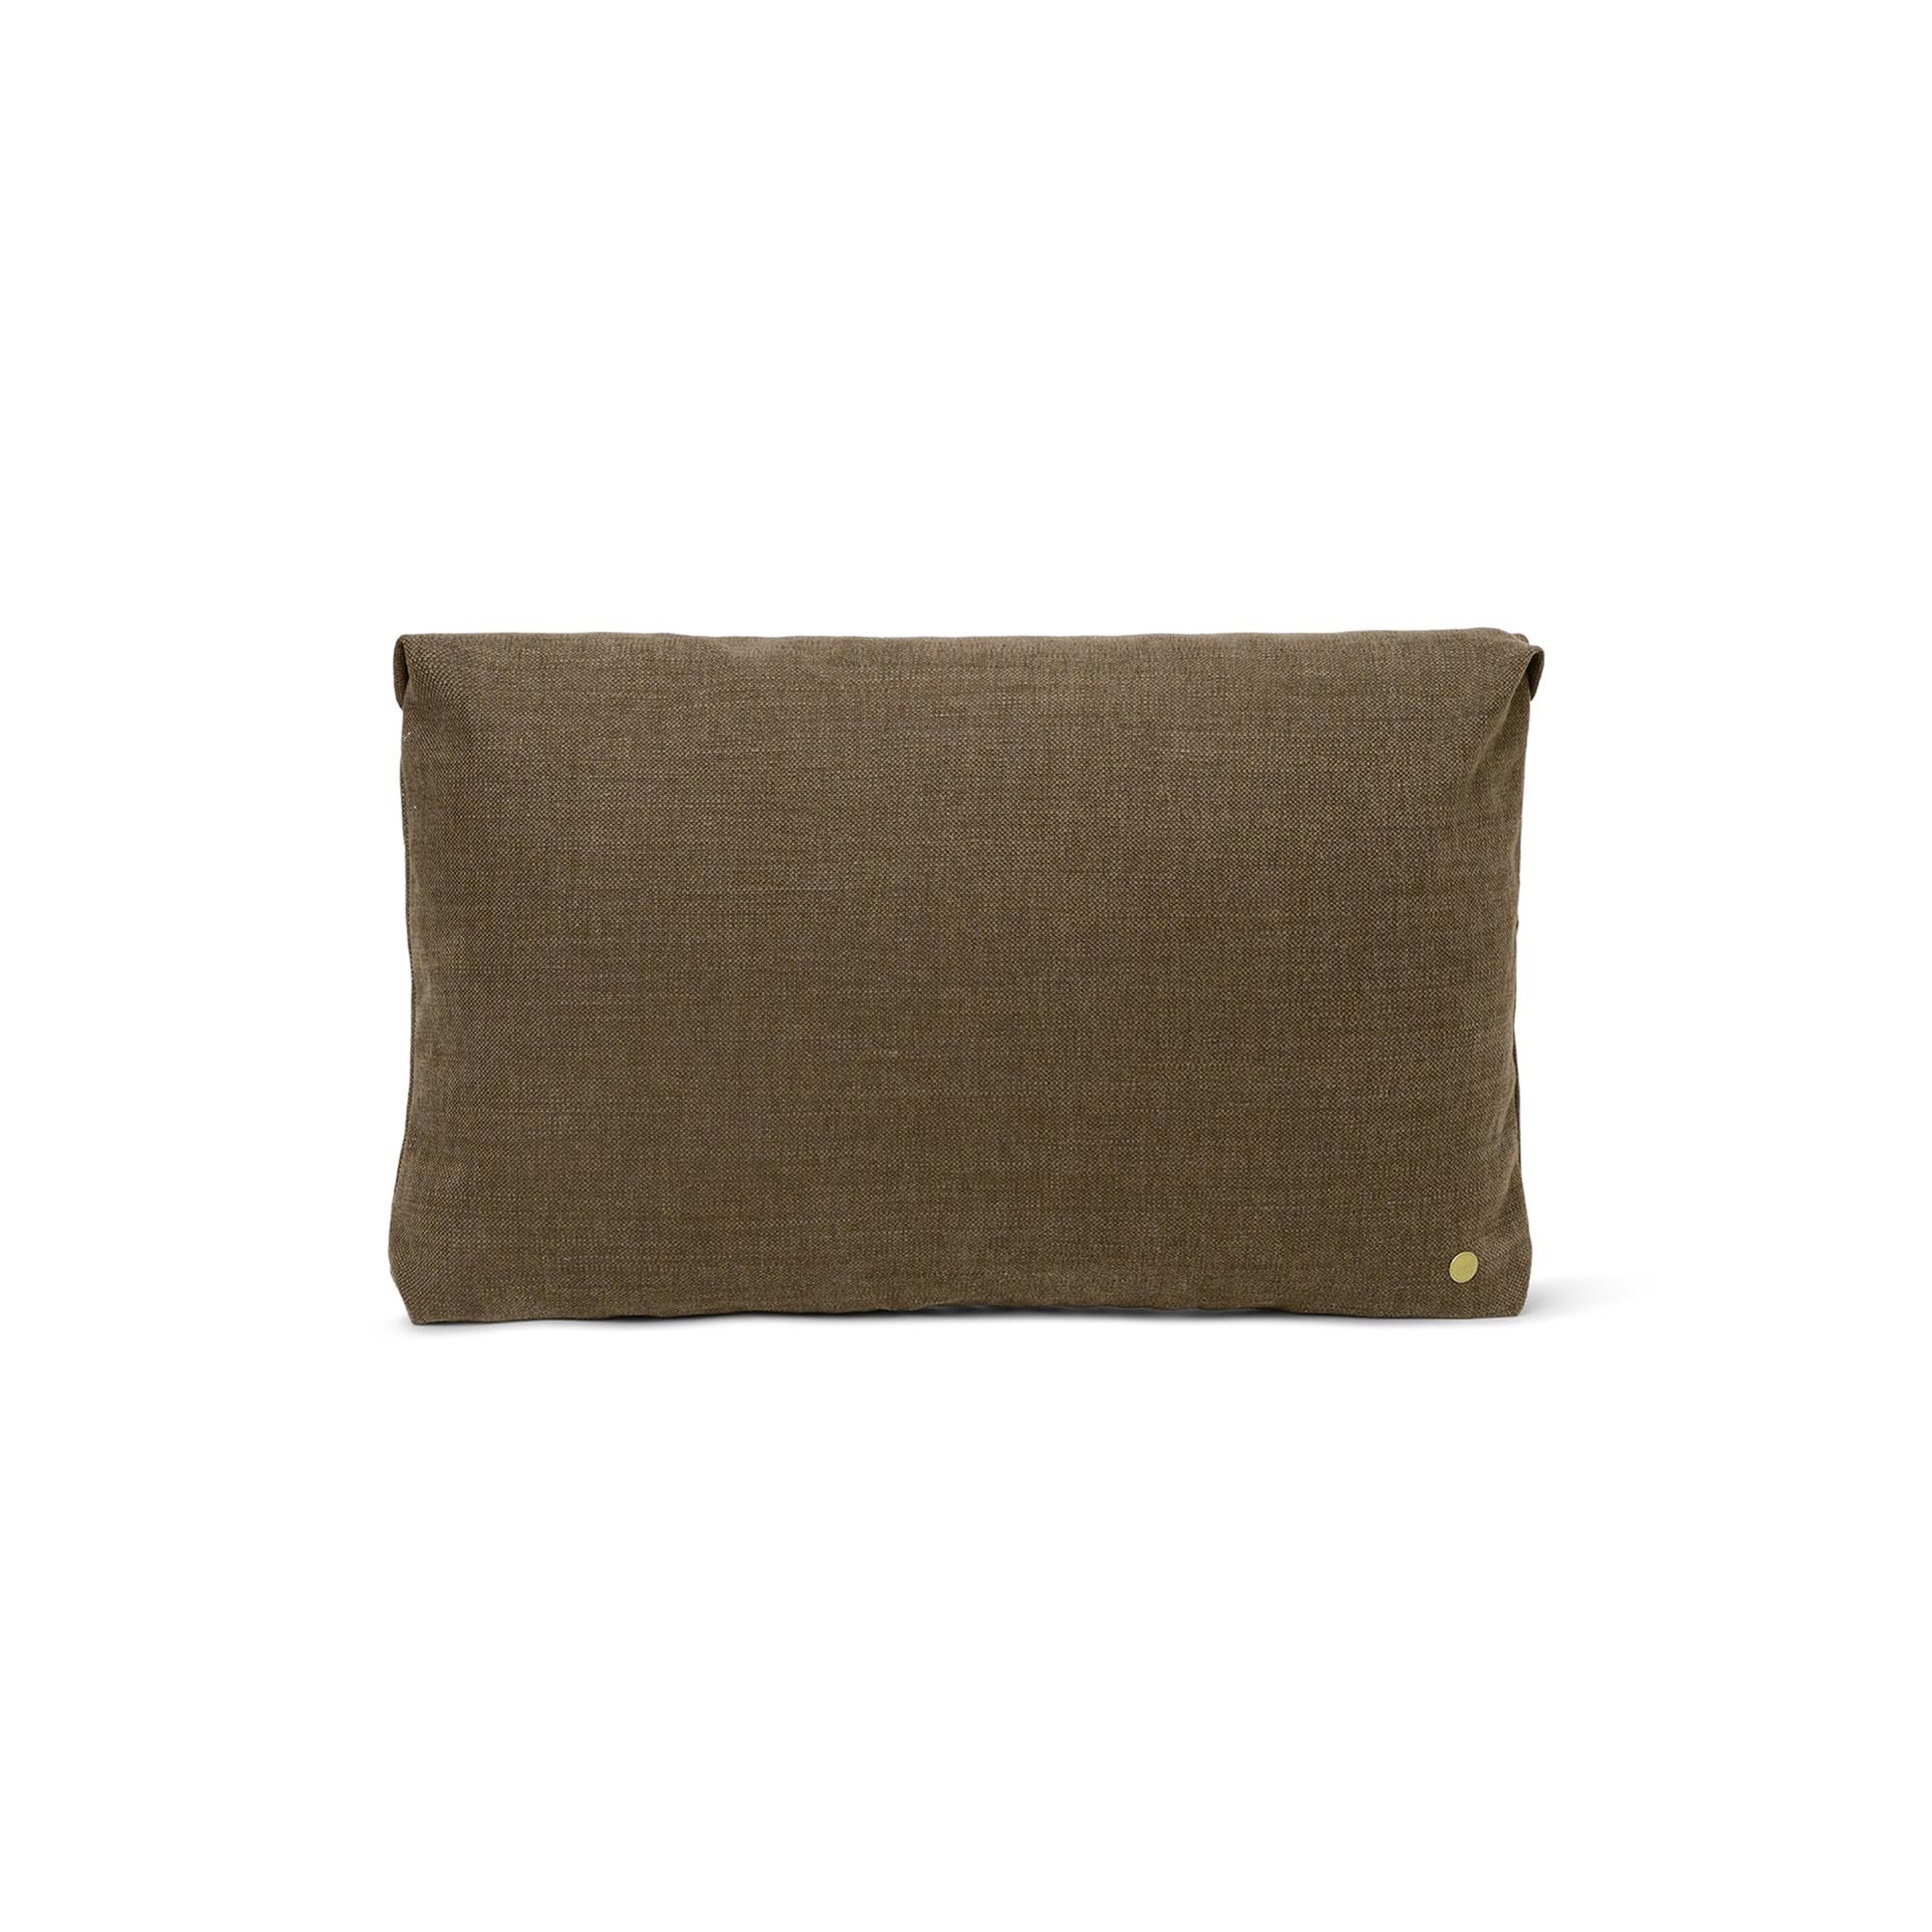 Ferm Living Clean Pillow Hot Madison Smoked Chocolate